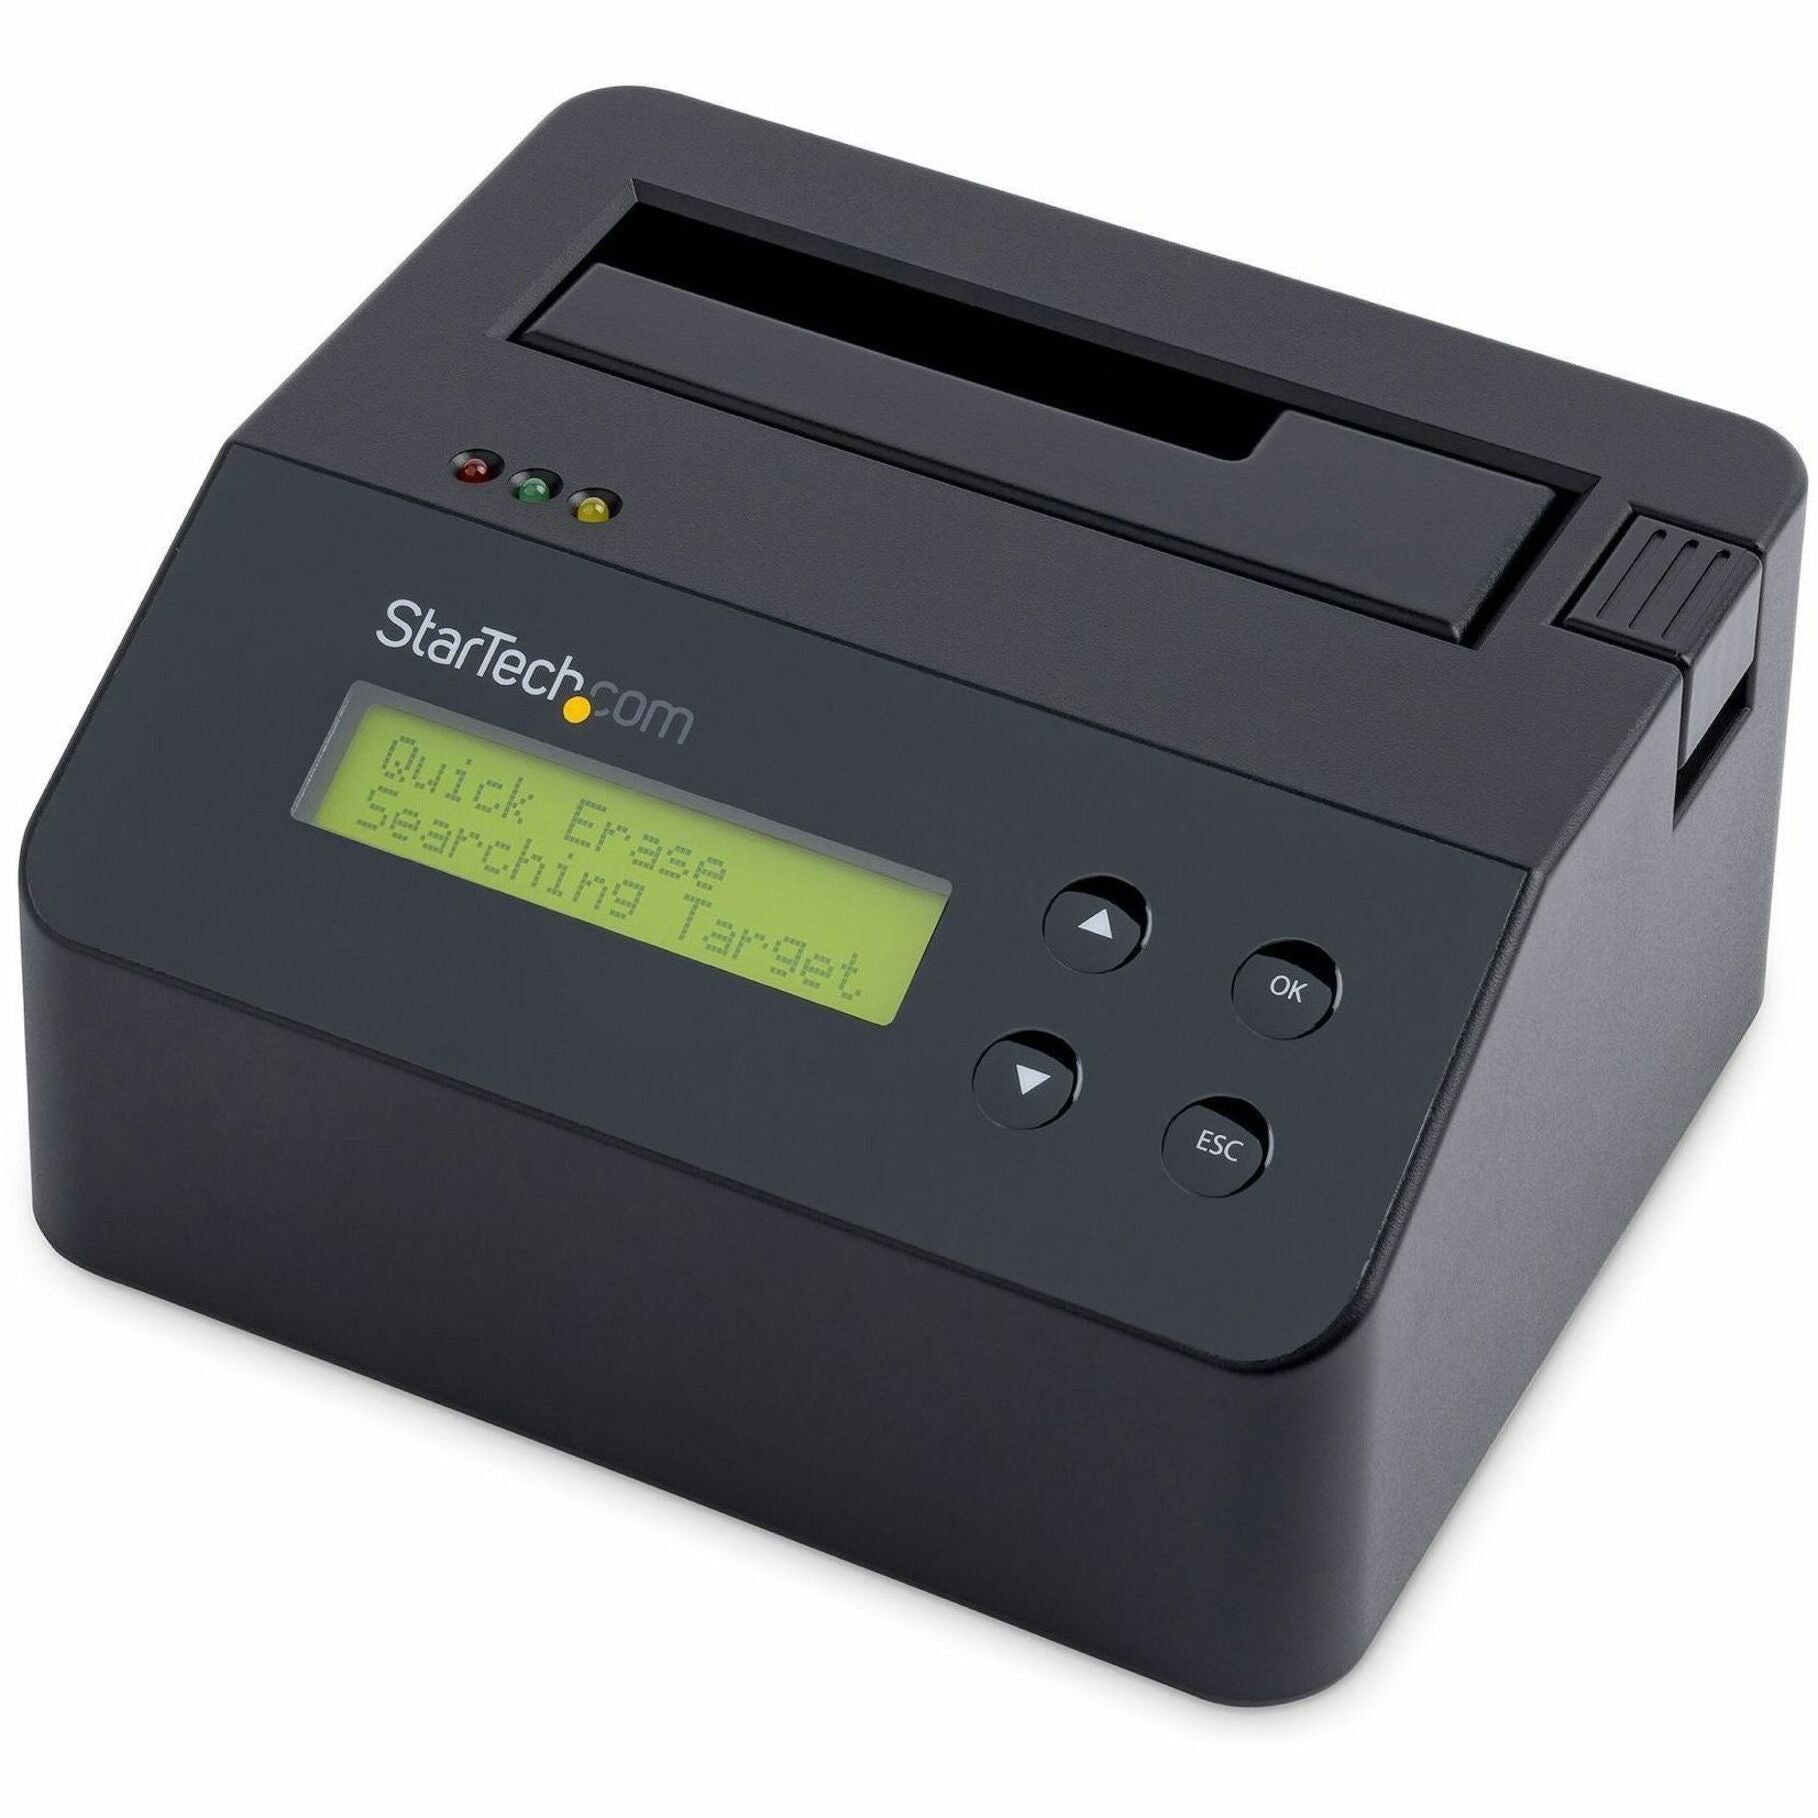 StarTech.com SDOCK1EU3P USB 3.0 Standalone Eraser Dock for 2.5" and 3.5" SATA SSD/HDD Drives, Secure Drive Erase with Receipt Printing